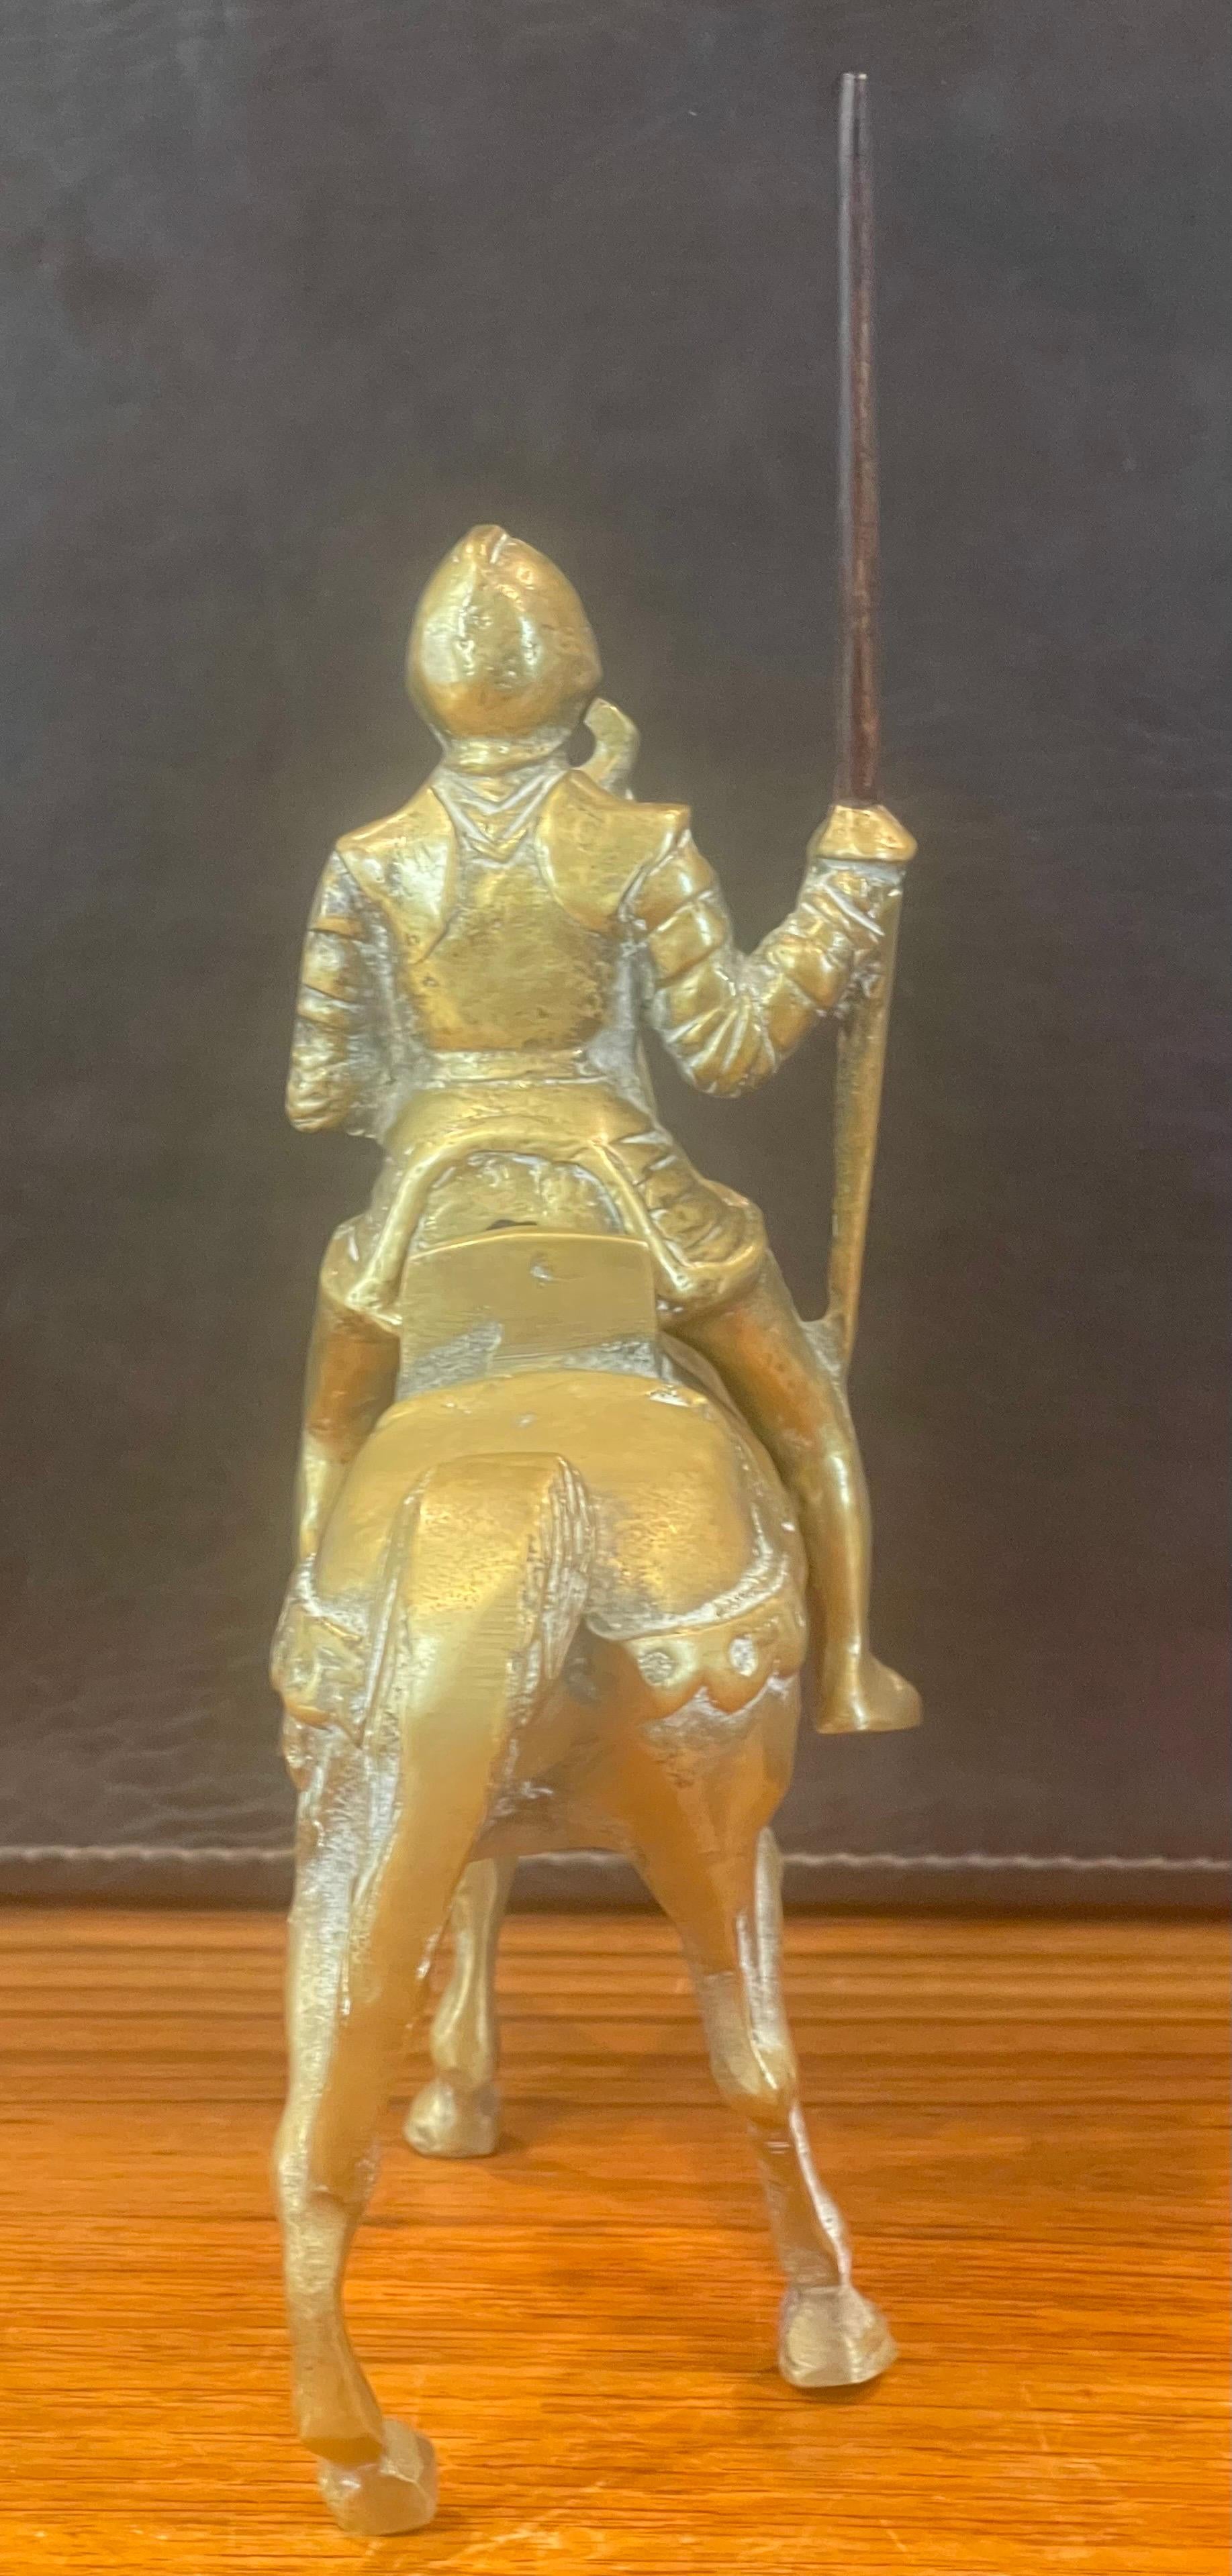 20th Century Solid Cast Brass Medieval Armored Knight on Horse Sculpture For Sale